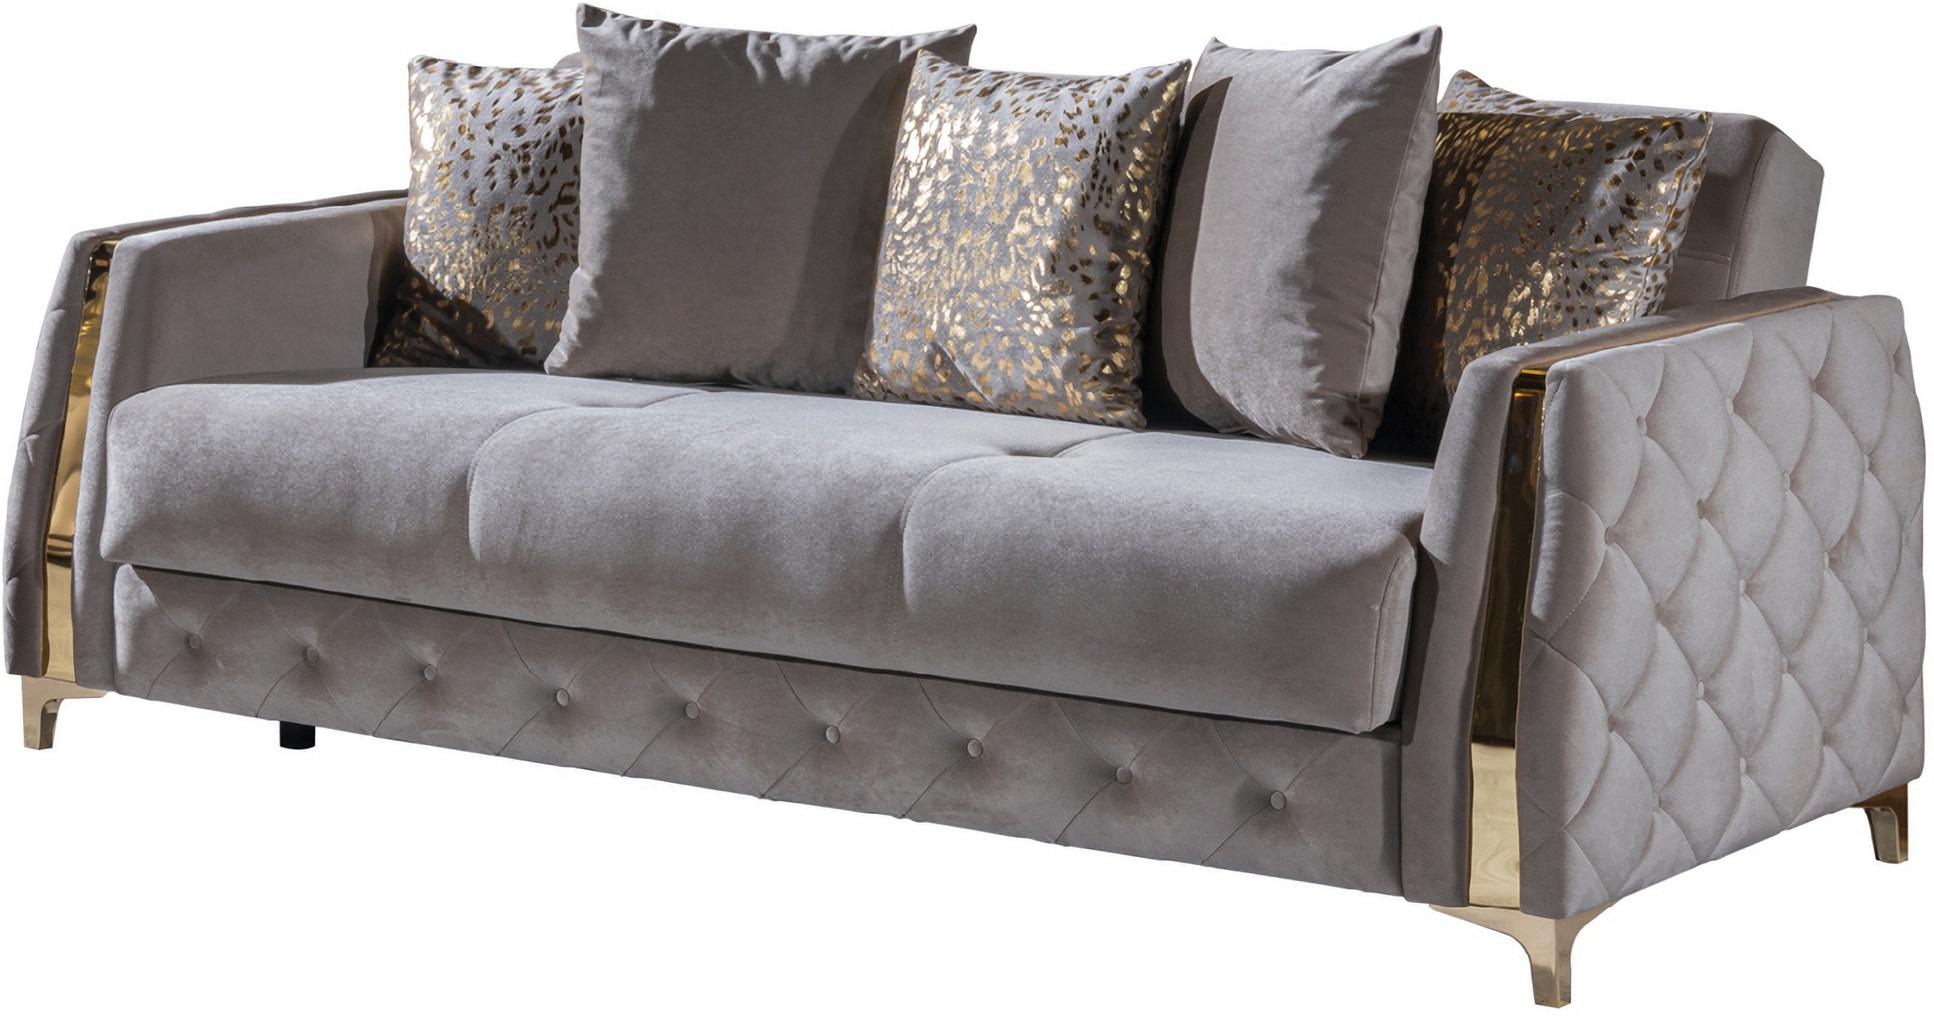 Contemporary, Modern Sofa Sleeper Lust Lust-S in Taupe Fabric